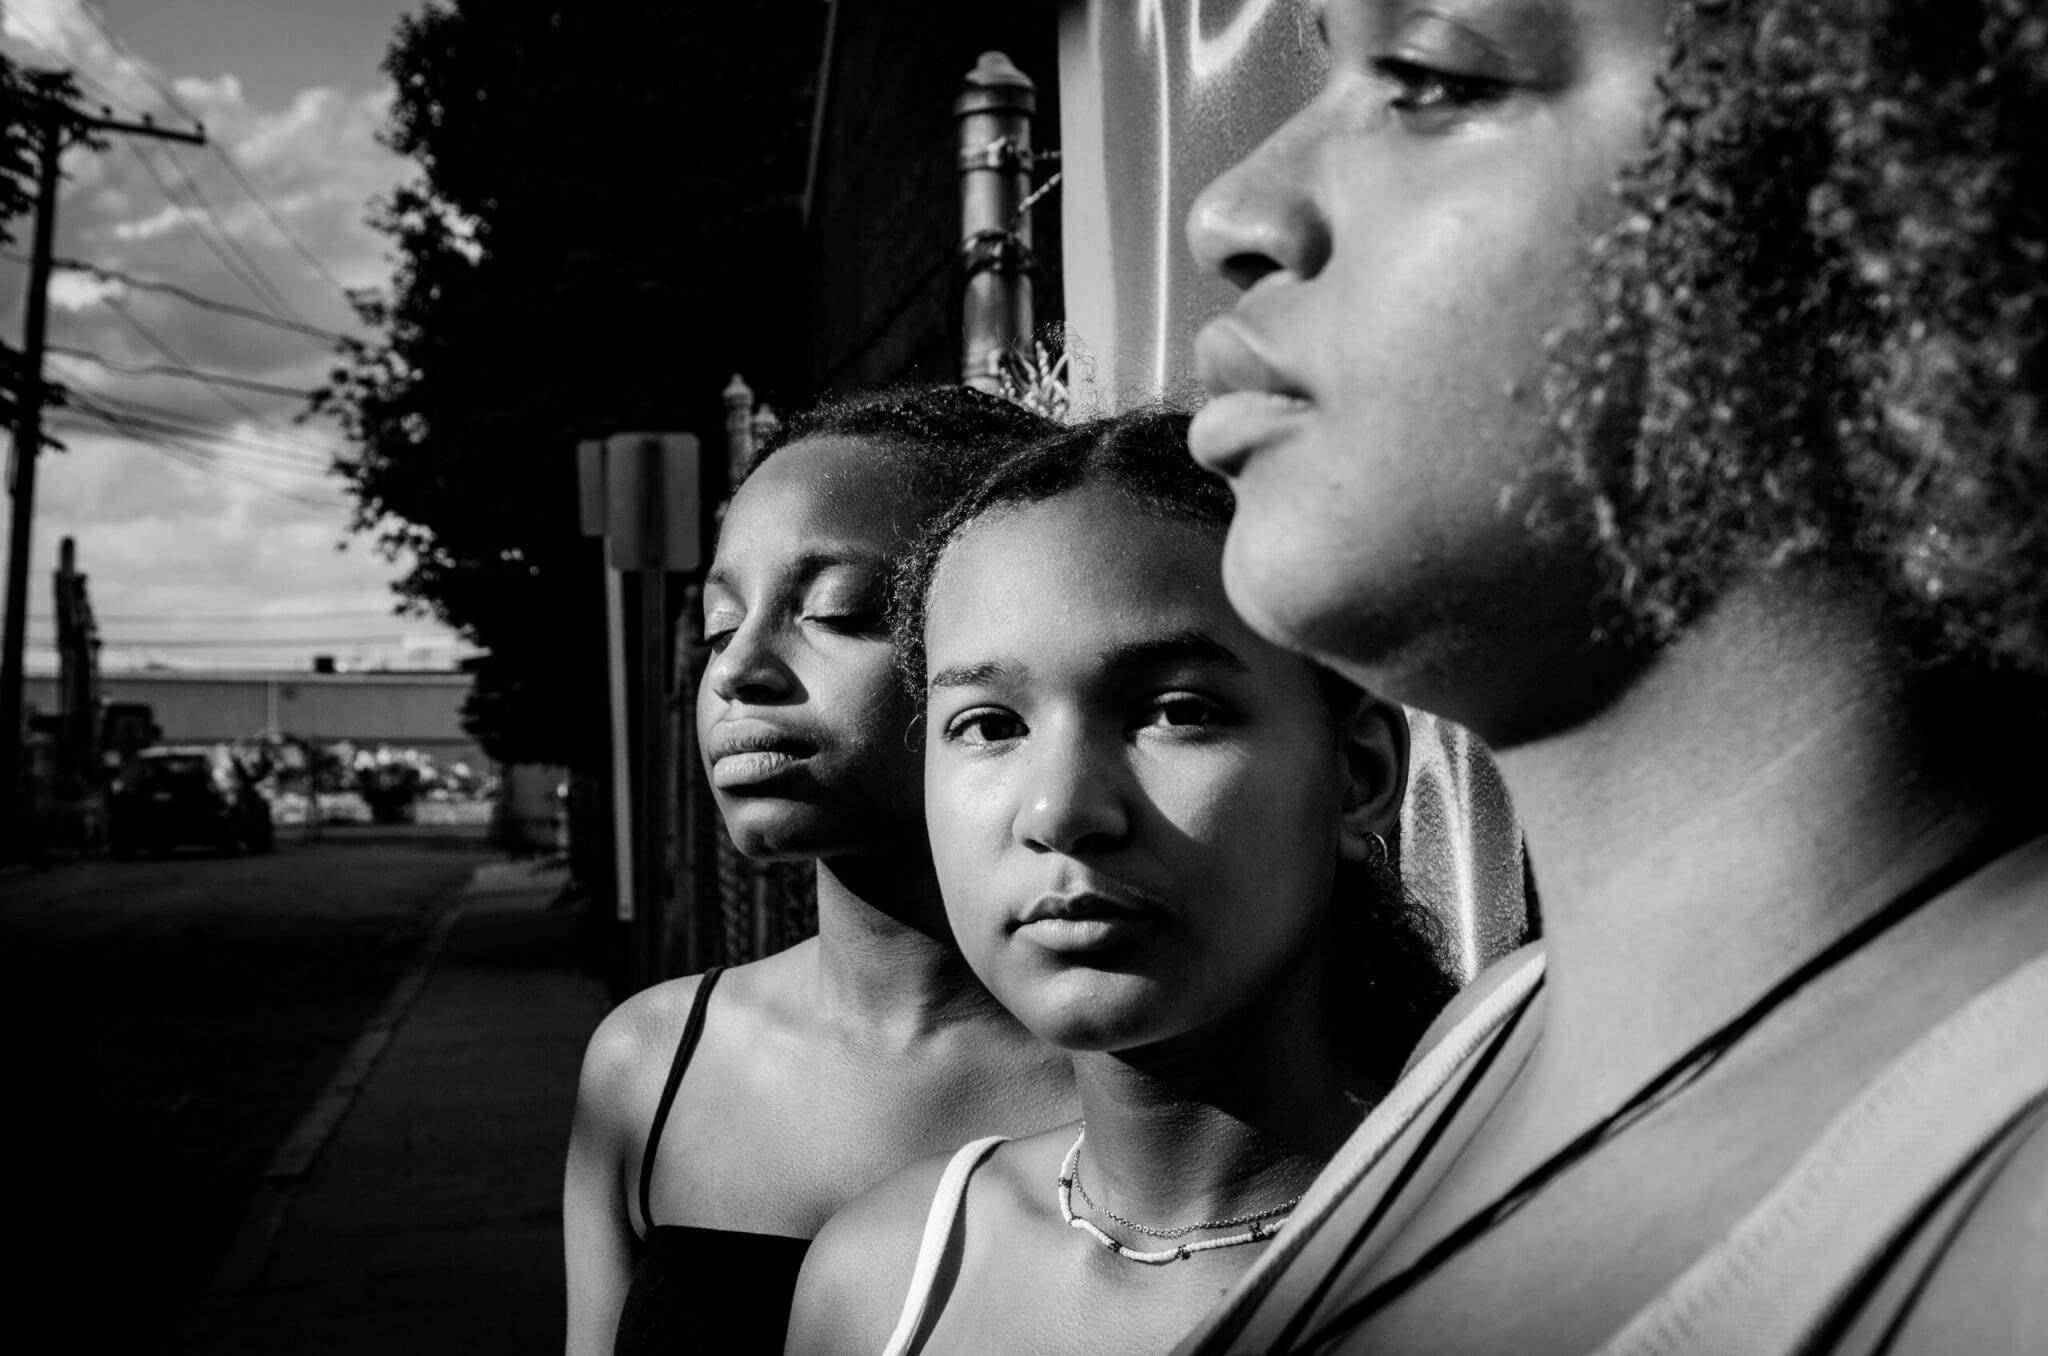 A black and white photograph of three women, by Kristen Emack.